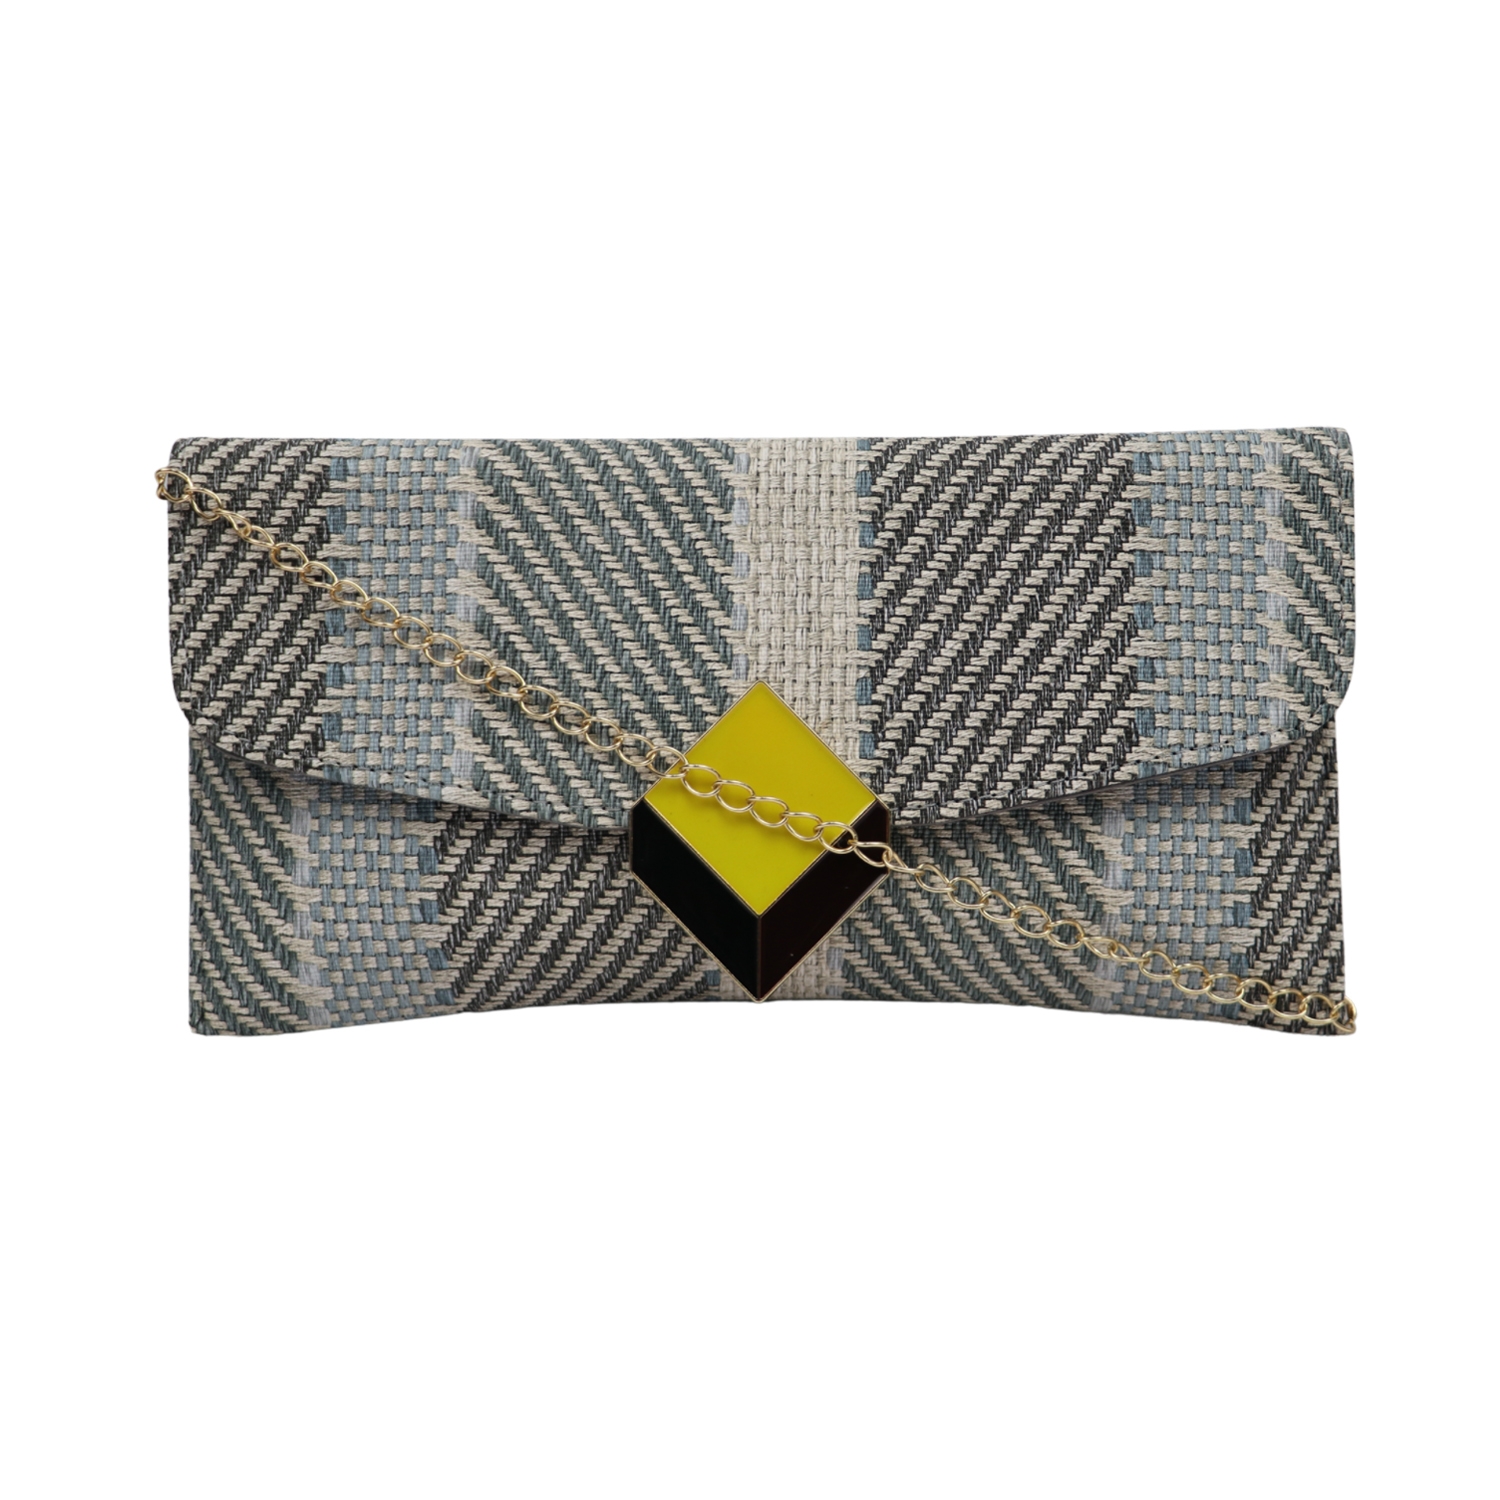 EMM | Printed casual clutch with a detachable chain for women 4